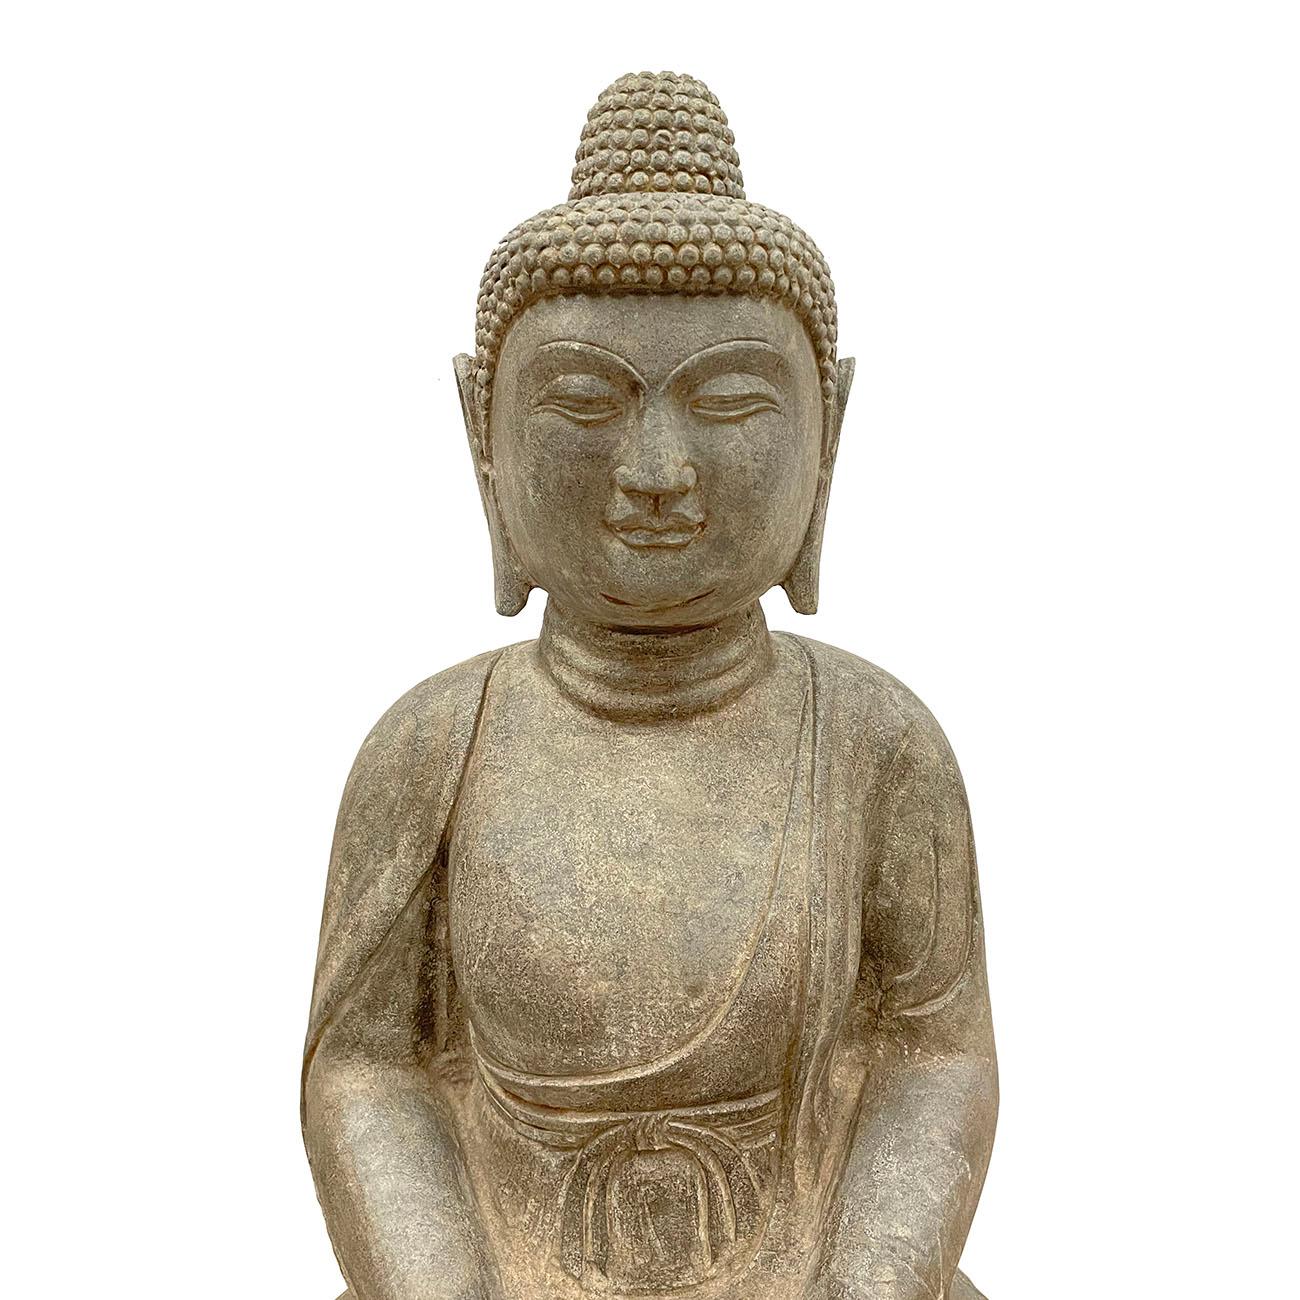 This is a large, finely carved Tang Dynasty style stone statue of Amitabha Sakyamuni Buddha. Below the neatly gathered hair, a full-cheeked face with large eyes, downcast smile and full pursed lips, all flanked by long pendulous earlobes. Buddha